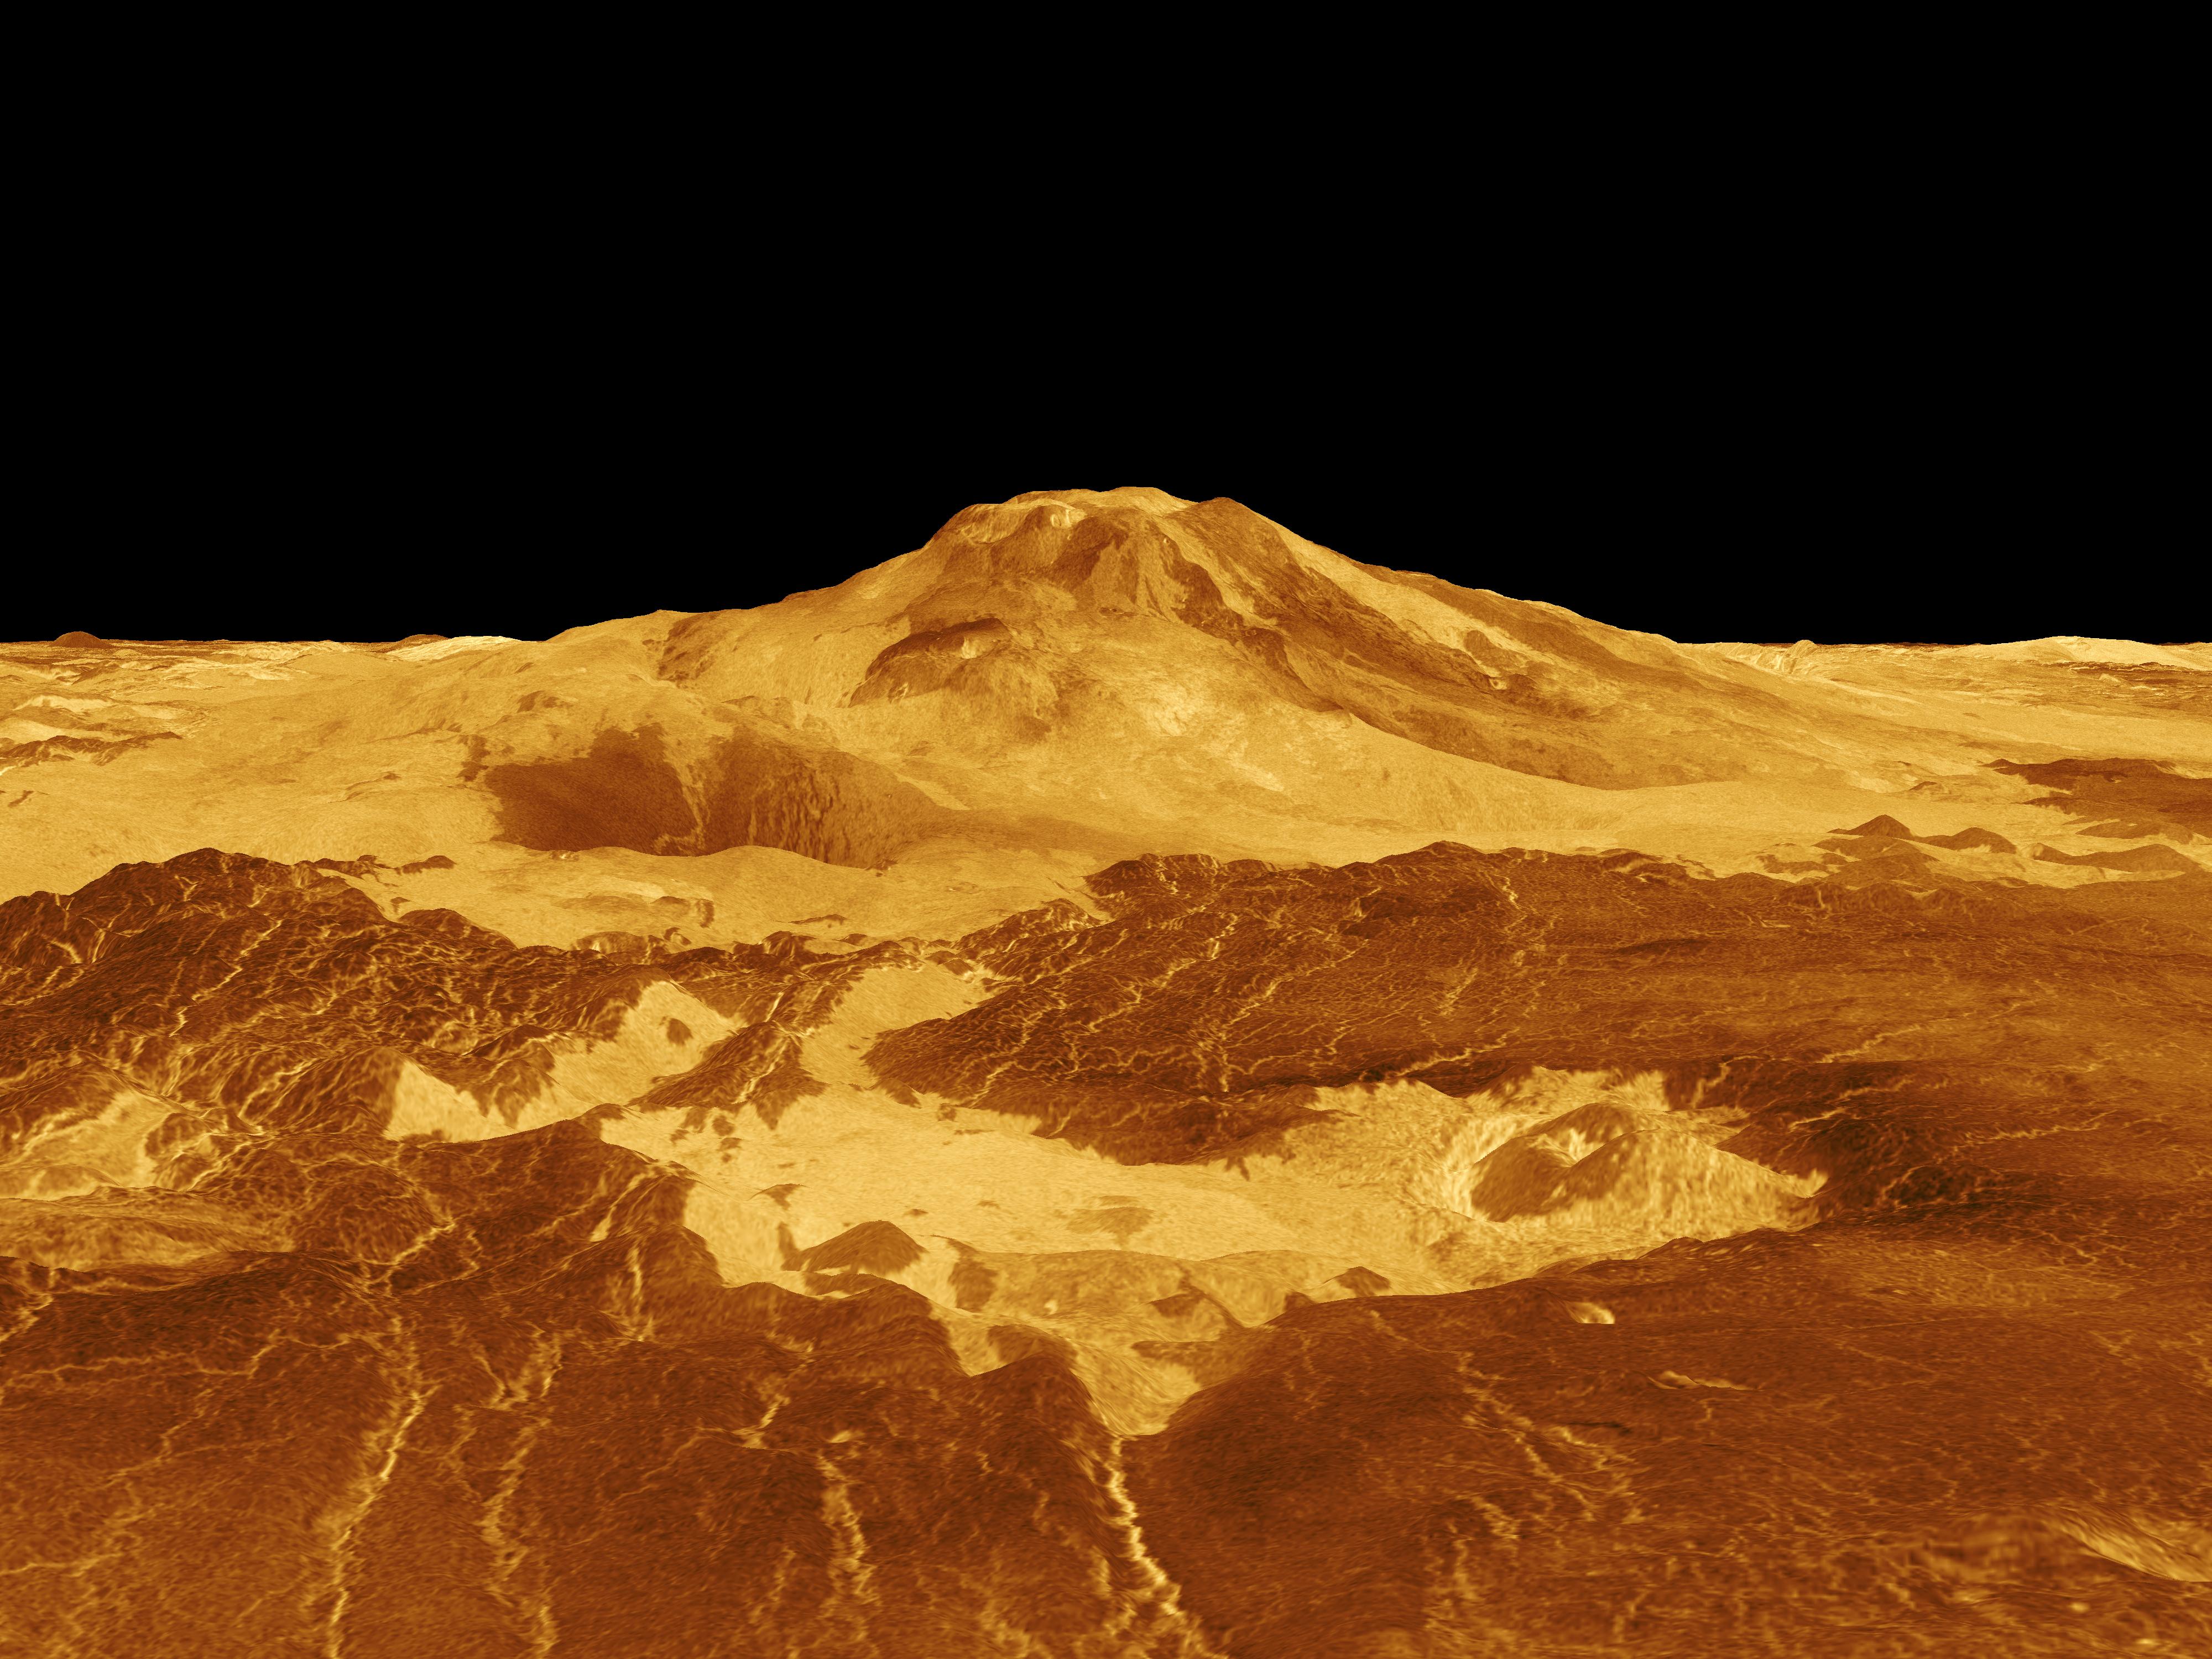 Computer-generated image of the Maat Mons volcano on Venus' surface. This yellow and gold photo with black background of Maat Mons reaches up to 8 km (4.9 miles) above Venus’ average surface.